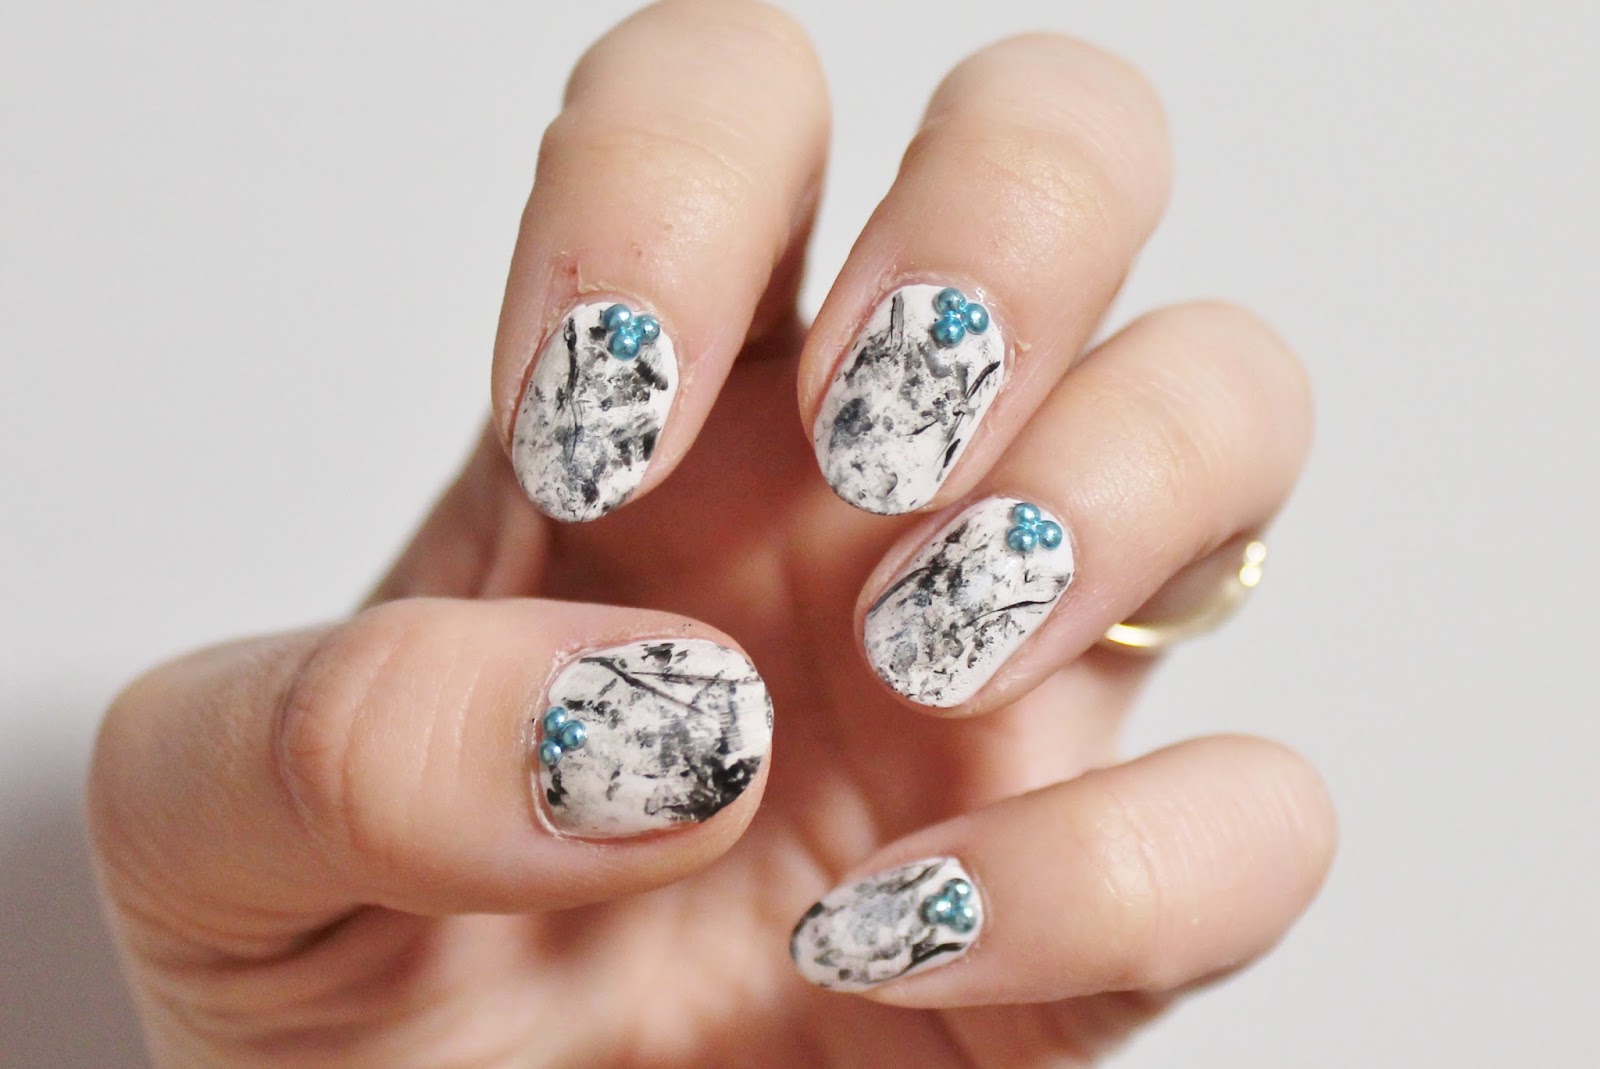 3. Yellow and Grey Marble Nail Art - wide 6